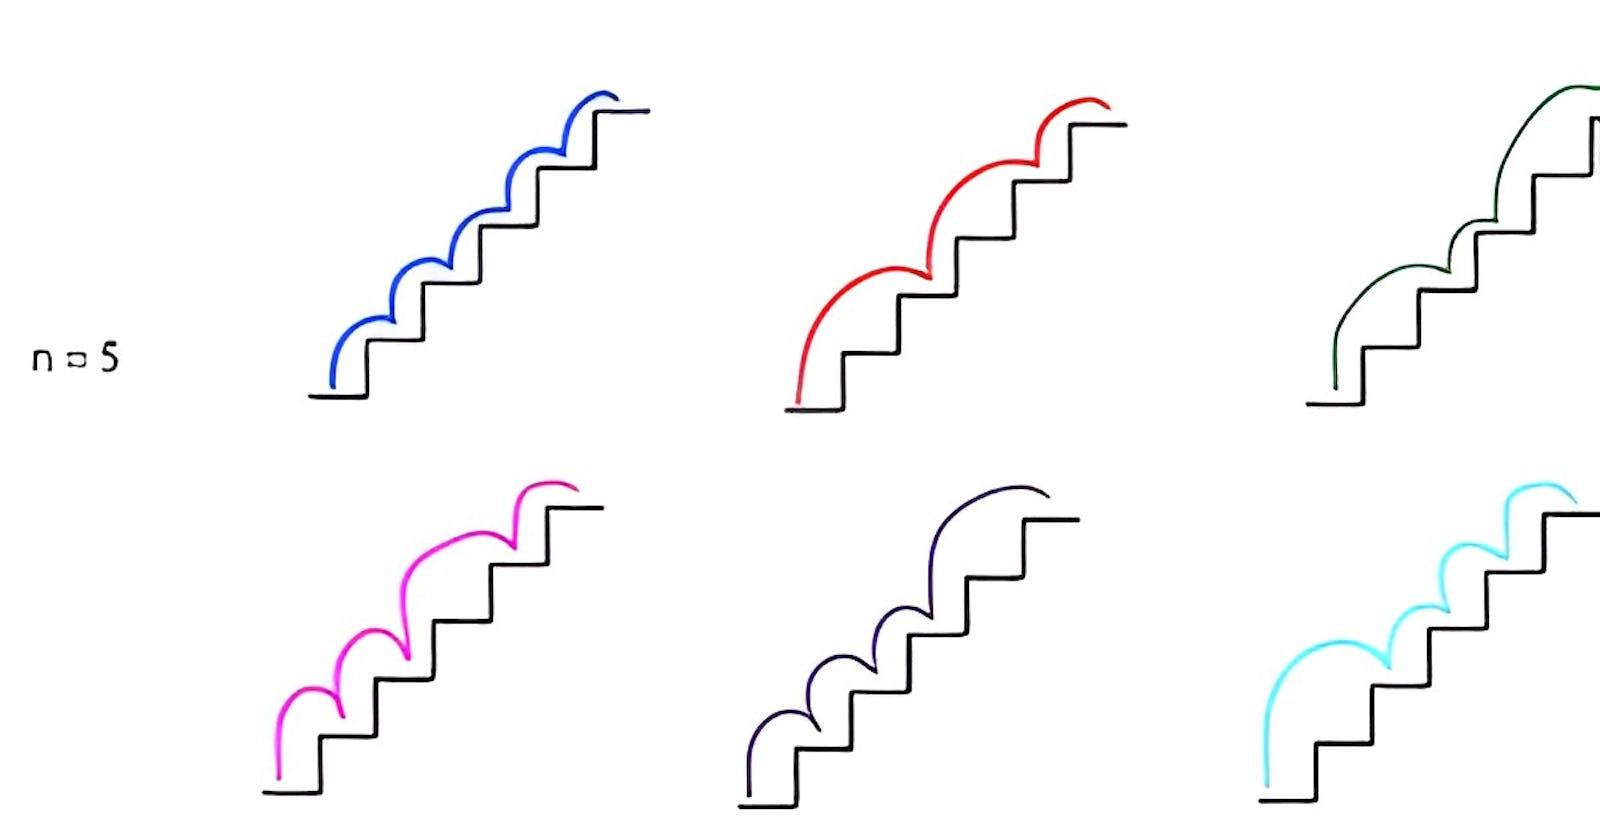 Climbing Stairs Leetcode problem solution